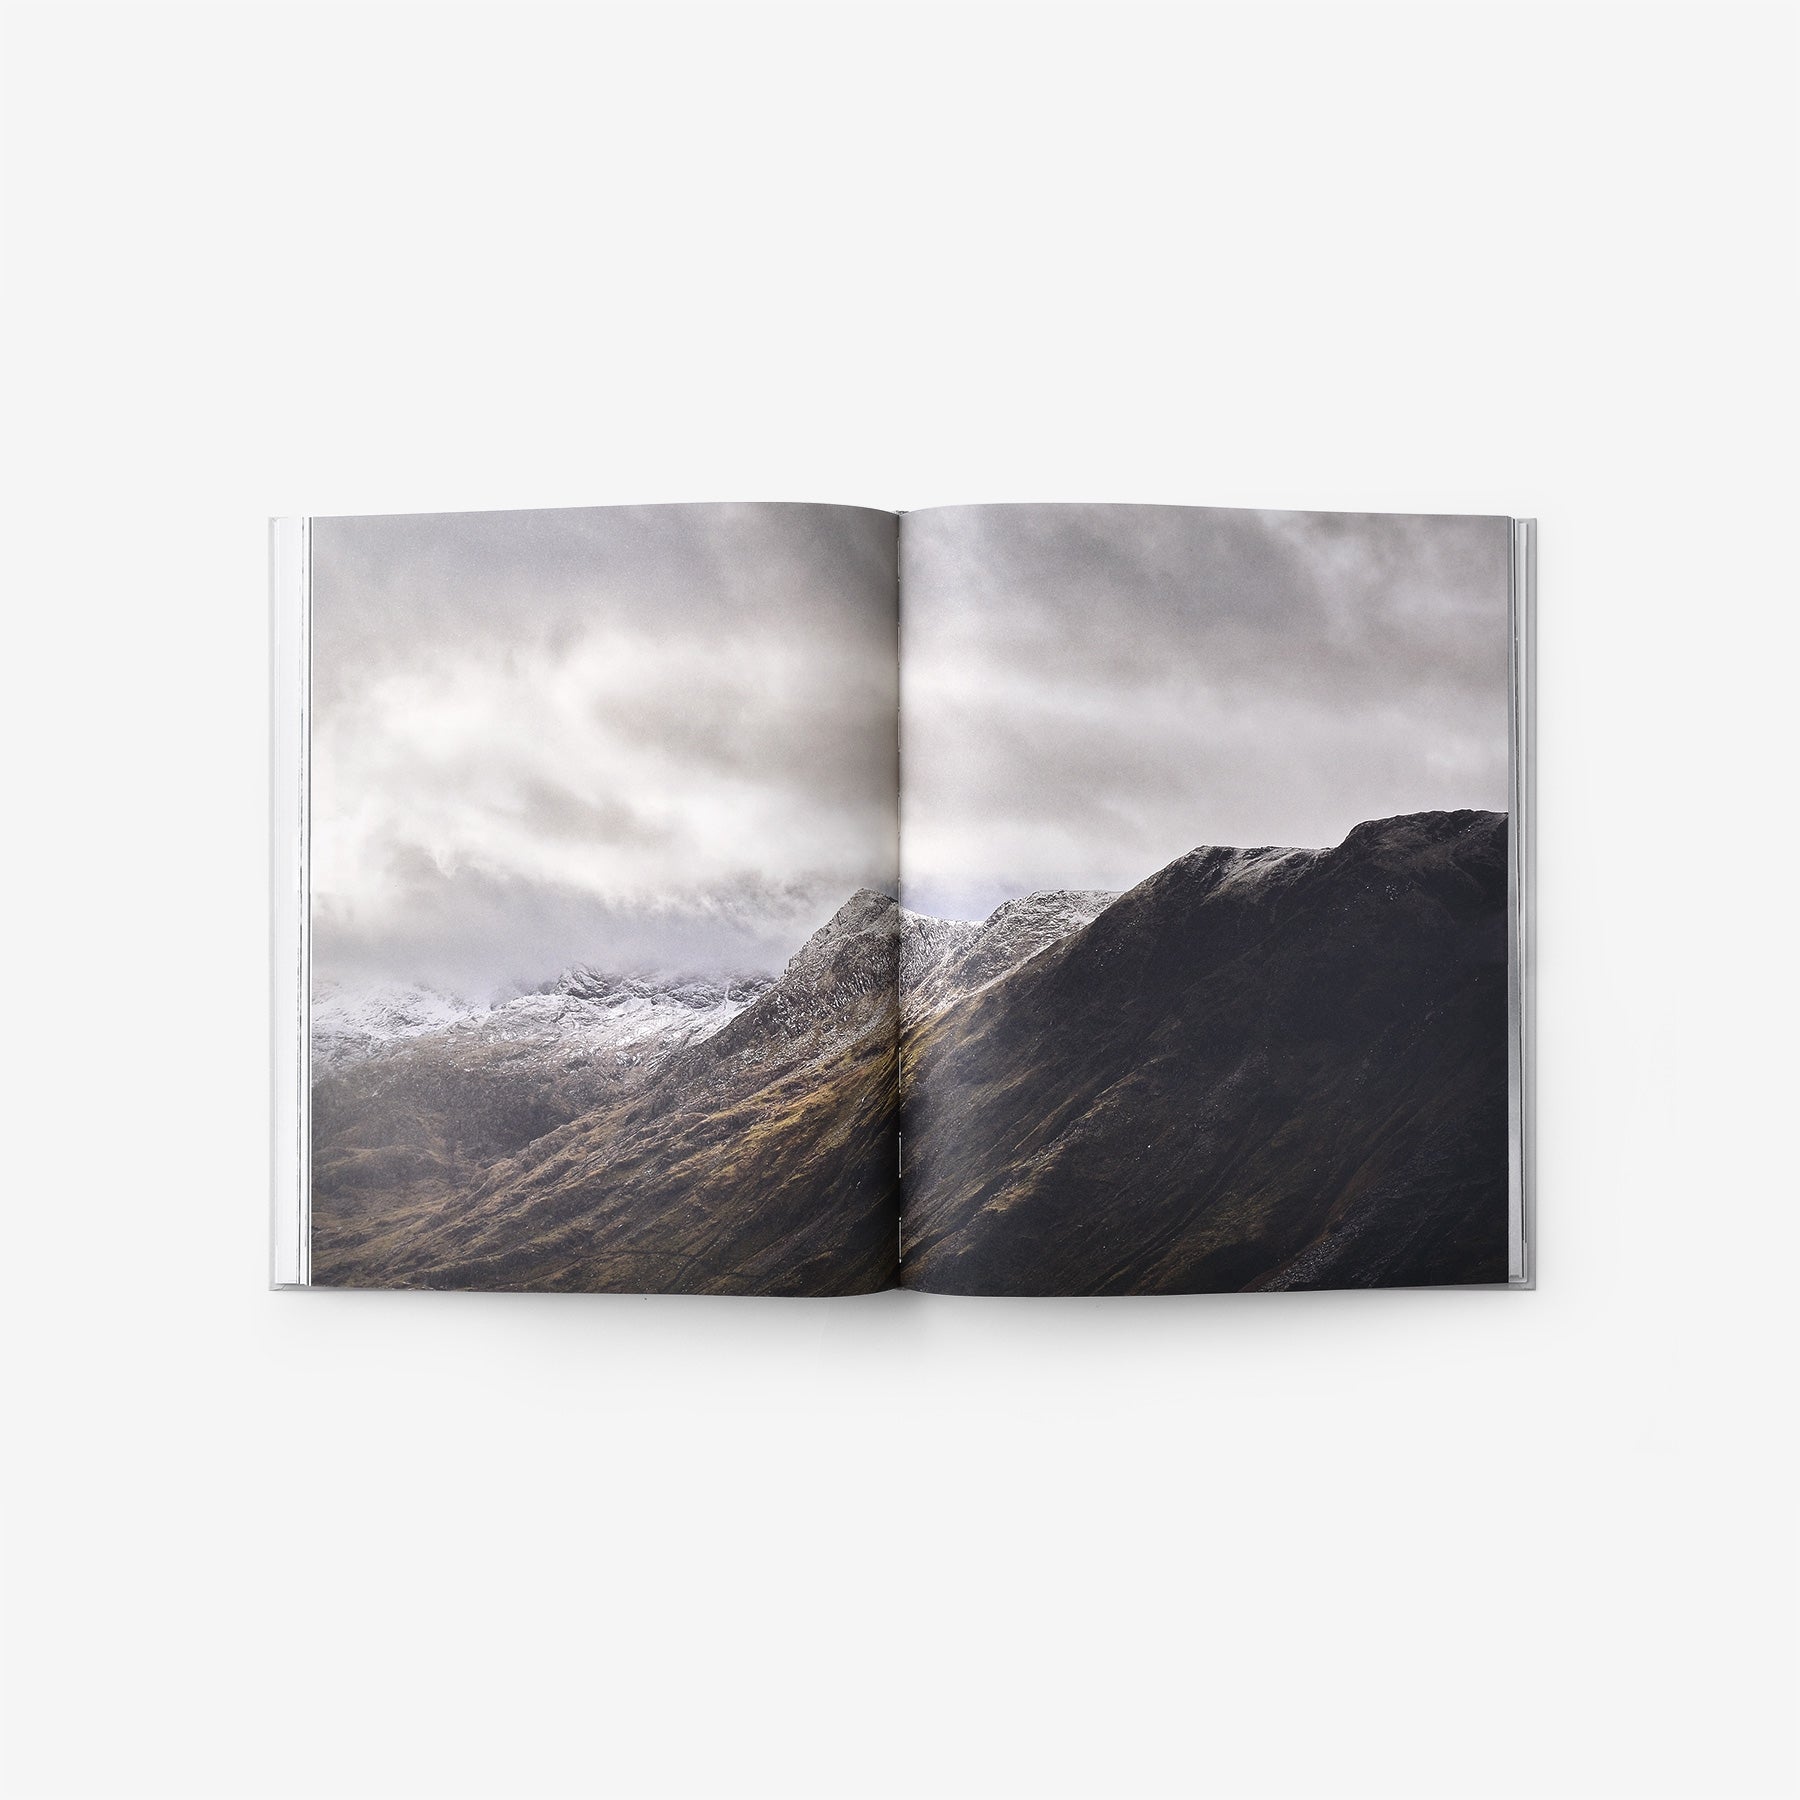 These Islands: A Portrait of the British Isles (Cereal Magazine)